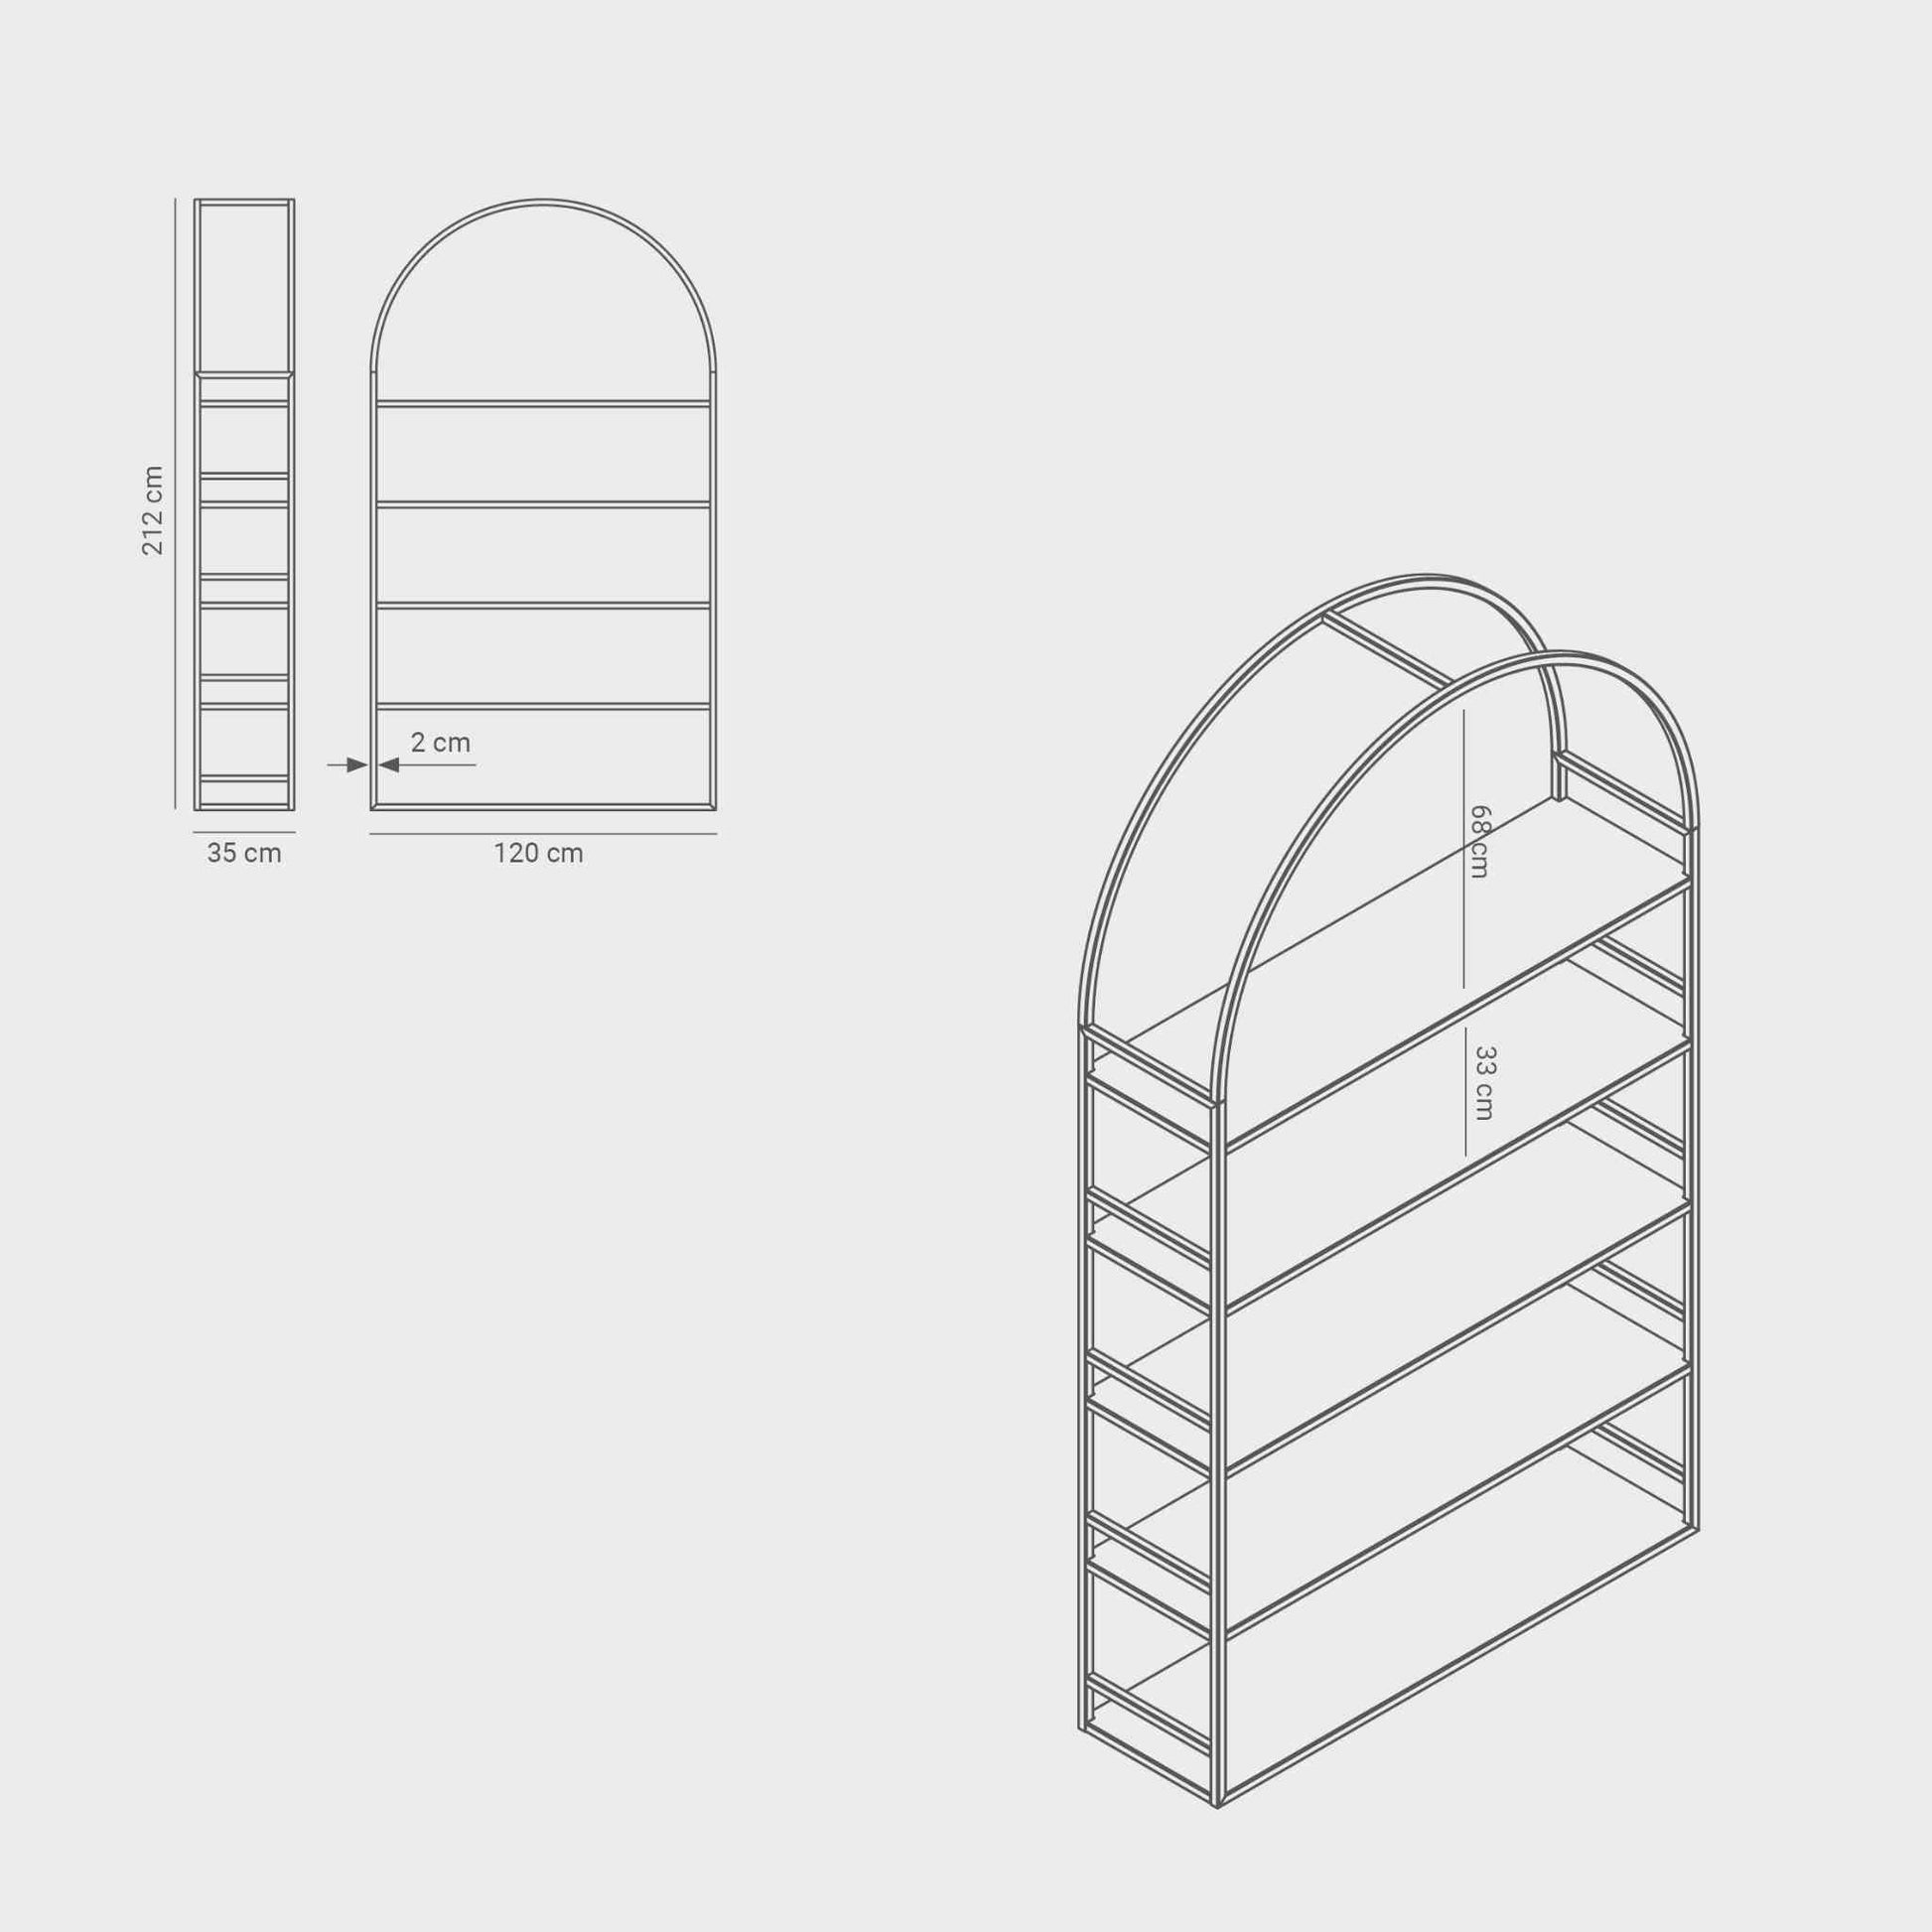 Measurements of the arched bookcase Arkada 03, available in Switzerland through ÉTAUDORÉ, made from highest quality powdered coated steel in white